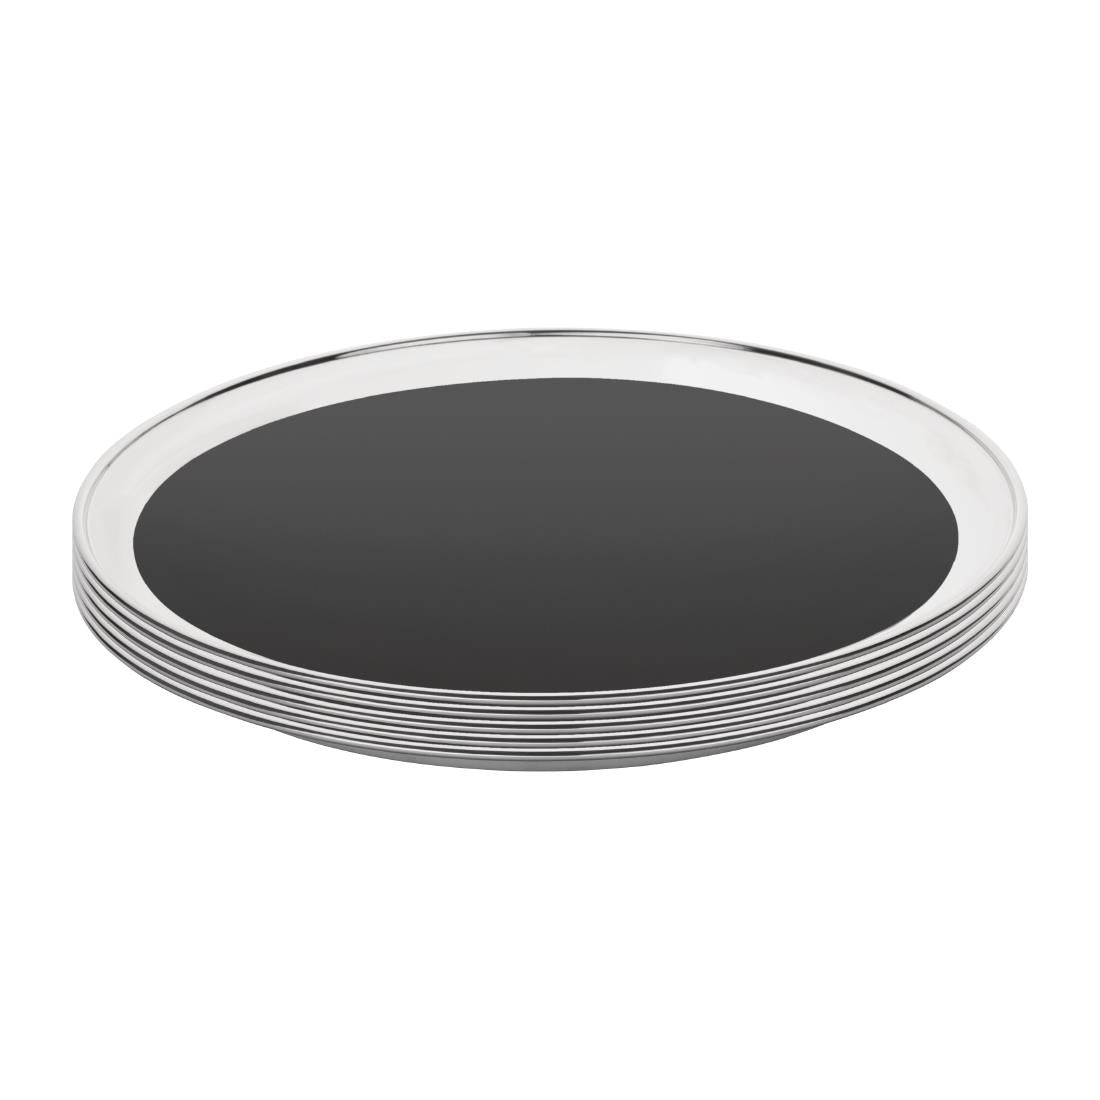 DP207 Olympia Stainless Steel Round Non-Slip Bar Tray 305mm JD Catering Equipment Solutions Ltd